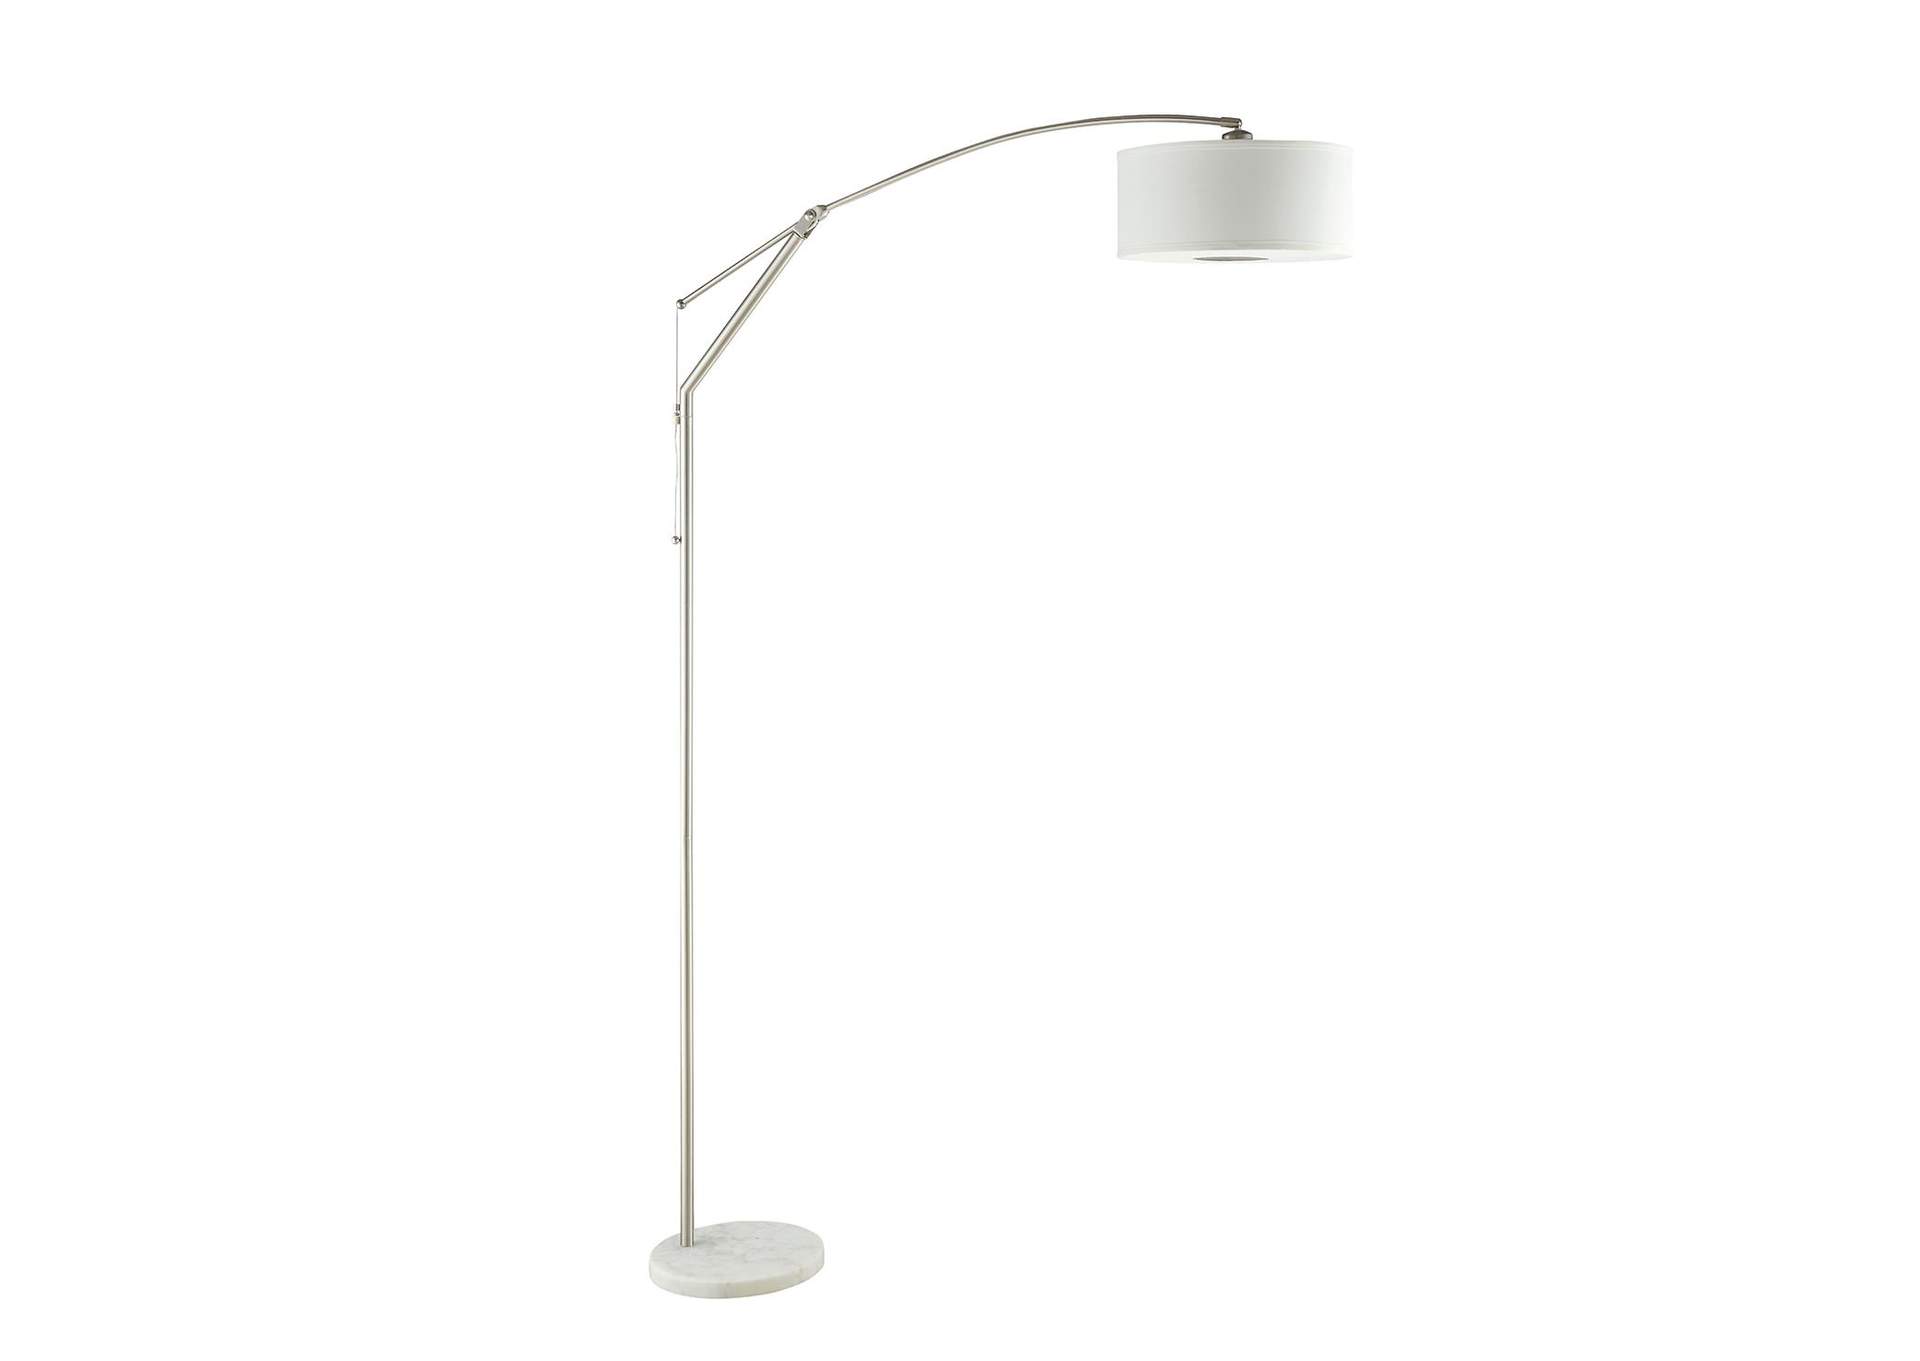 Adjustable Arched Arm Floor Lamp Chrome and White,Coaster Furniture